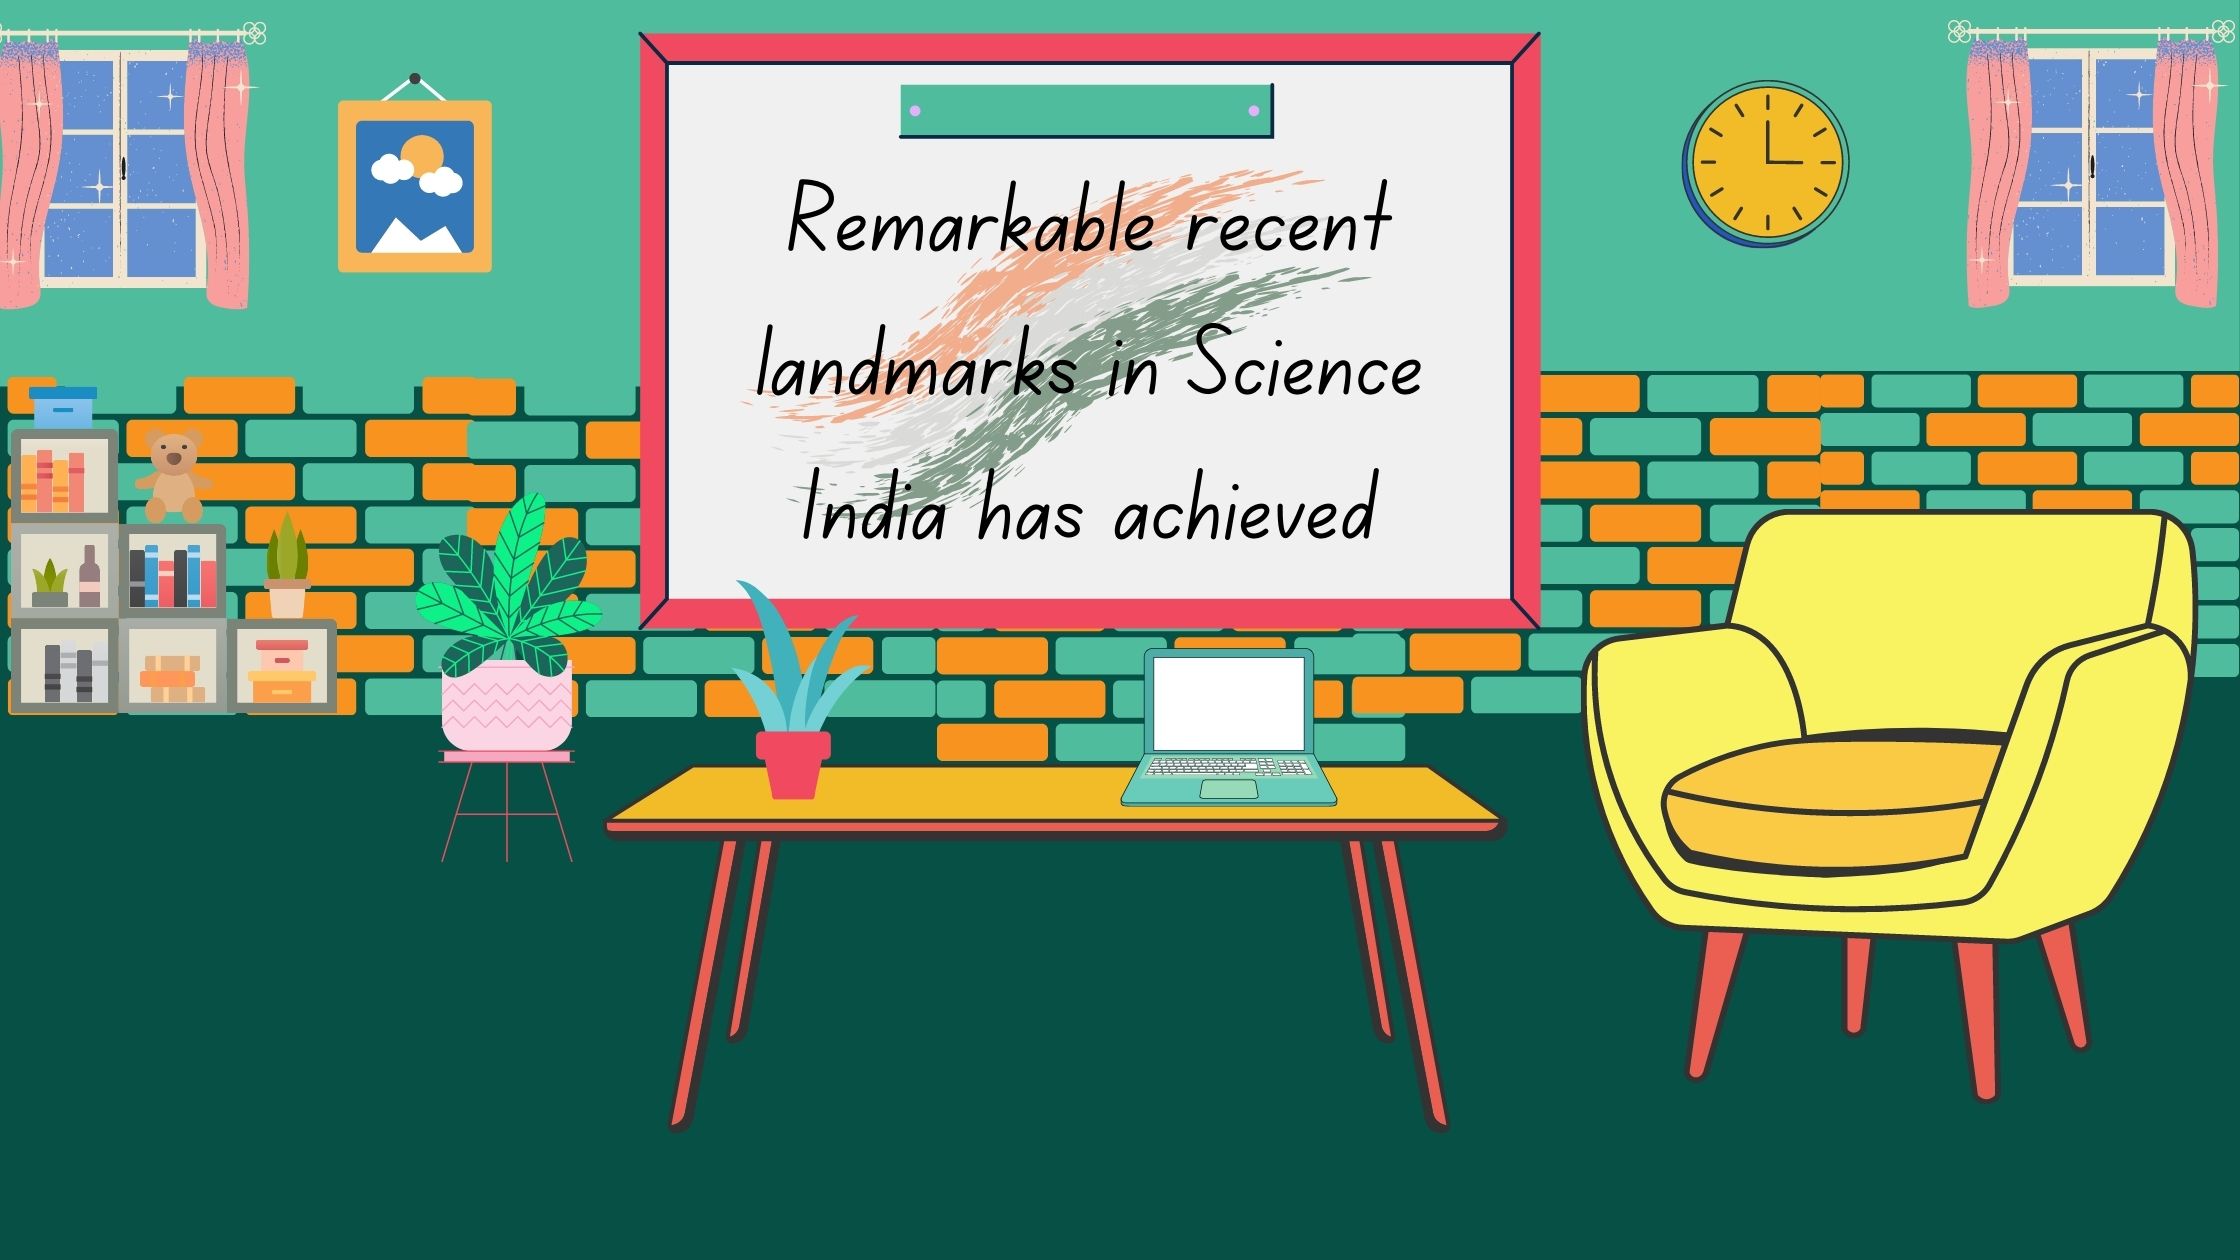 7 remarkable achievements in Science India has seen